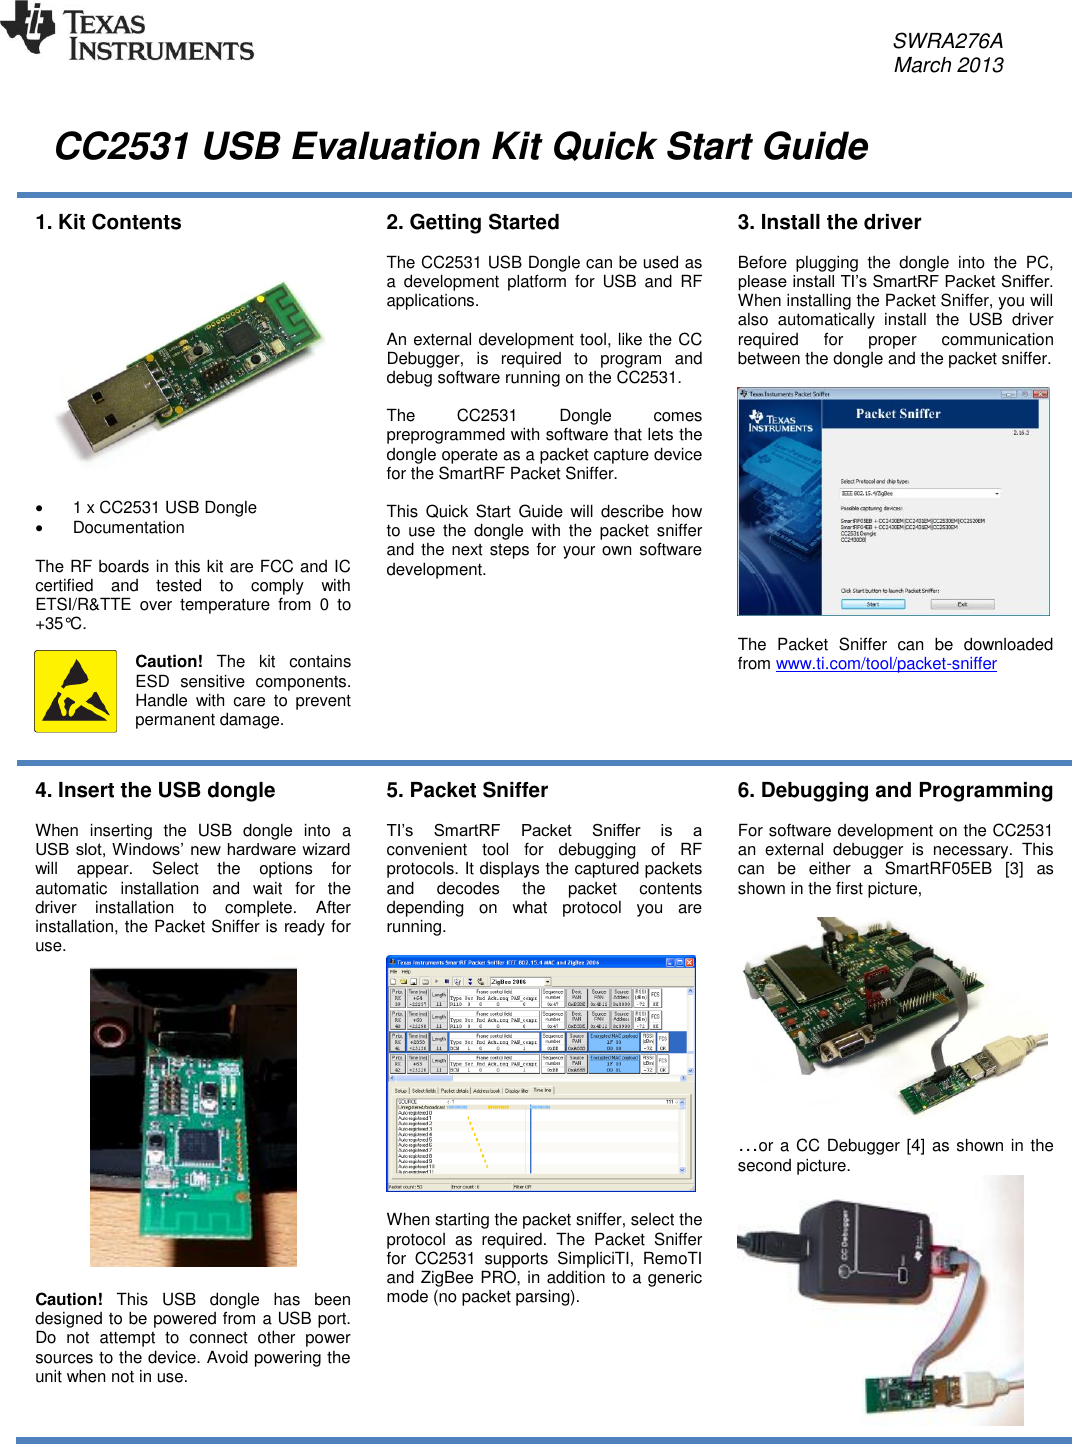     SWRA276A     March 2013    CC2531 USB Evaluation Kit Quick Start Guide  1. Kit Contents      1 x CC2531 USB Dongle   Documentation  The RF boards in this kit are FCC and IC certified  and  tested  to  comply  with ETSI/R&amp;TTE  over  temperature  from  0  to +35°C.   Caution!  The  kit  contains ESD  sensitive  components. Handle  with  care  to  prevent permanent damage.  2. Getting Started  The CC2531 USB Dongle can be used as a  development  platform  for  USB  and  RF applications.  An external development tool, like the CC Debugger,  is  required  to  program  and debug software running on the CC2531.  The  CC2531  Dongle  comes preprogrammed with software that lets the dongle operate as a packet capture device for the SmartRF Packet Sniffer.  This  Quick  Start  Guide  will  describe how to  use  the  dongle  with  the  packet  sniffer and the next steps for your own software development. 3. Install the driver  Before  plugging  the  dongle  into  the  PC, please install TI’s SmartRF Packet Sniffer. When installing the Packet Sniffer, you will also  automatically  install  the  USB  driver required  for  proper  communication between the dongle and the packet sniffer.     The  Packet  Sniffer  can  be  downloaded from www.ti.com/tool/packet-sniffer  4. Insert the USB dongle  When  inserting  the  USB  dongle  into  a USB slot, Windows’ new hardware wizard will  appear.  Select  the  options  for automatic  installation  and  wait  for  the driver  installation  to  complete.  After installation, the Packet Sniffer is ready for use.   Caution!  This  USB  dongle  has  been designed to be powered from a USB port. Do  not  attempt  to  connect  other  power sources to the device. Avoid powering the unit when not in use.  5. Packet Sniffer  TI’s  SmartRF  Packet  Sniffer  is  a convenient  tool  for  debugging  of  RF protocols. It displays the captured packets and  decodes  the  packet  contents depending  on  what  protocol  you  are running.    When starting the packet sniffer, select the protocol  as  required.  The  Packet  Sniffer for  CC2531  supports  SimpliciTI,  RemoTI and ZigBee PRO, in addition to a generic mode (no packet parsing).   6. Debugging and Programming  For software development on the CC2531 an  external  debugger  is  necessary.  This can  be  either  a  SmartRF05EB  [3]  as shown in the first picture,  …or a CC Debugger [4] as shown in the second picture.  